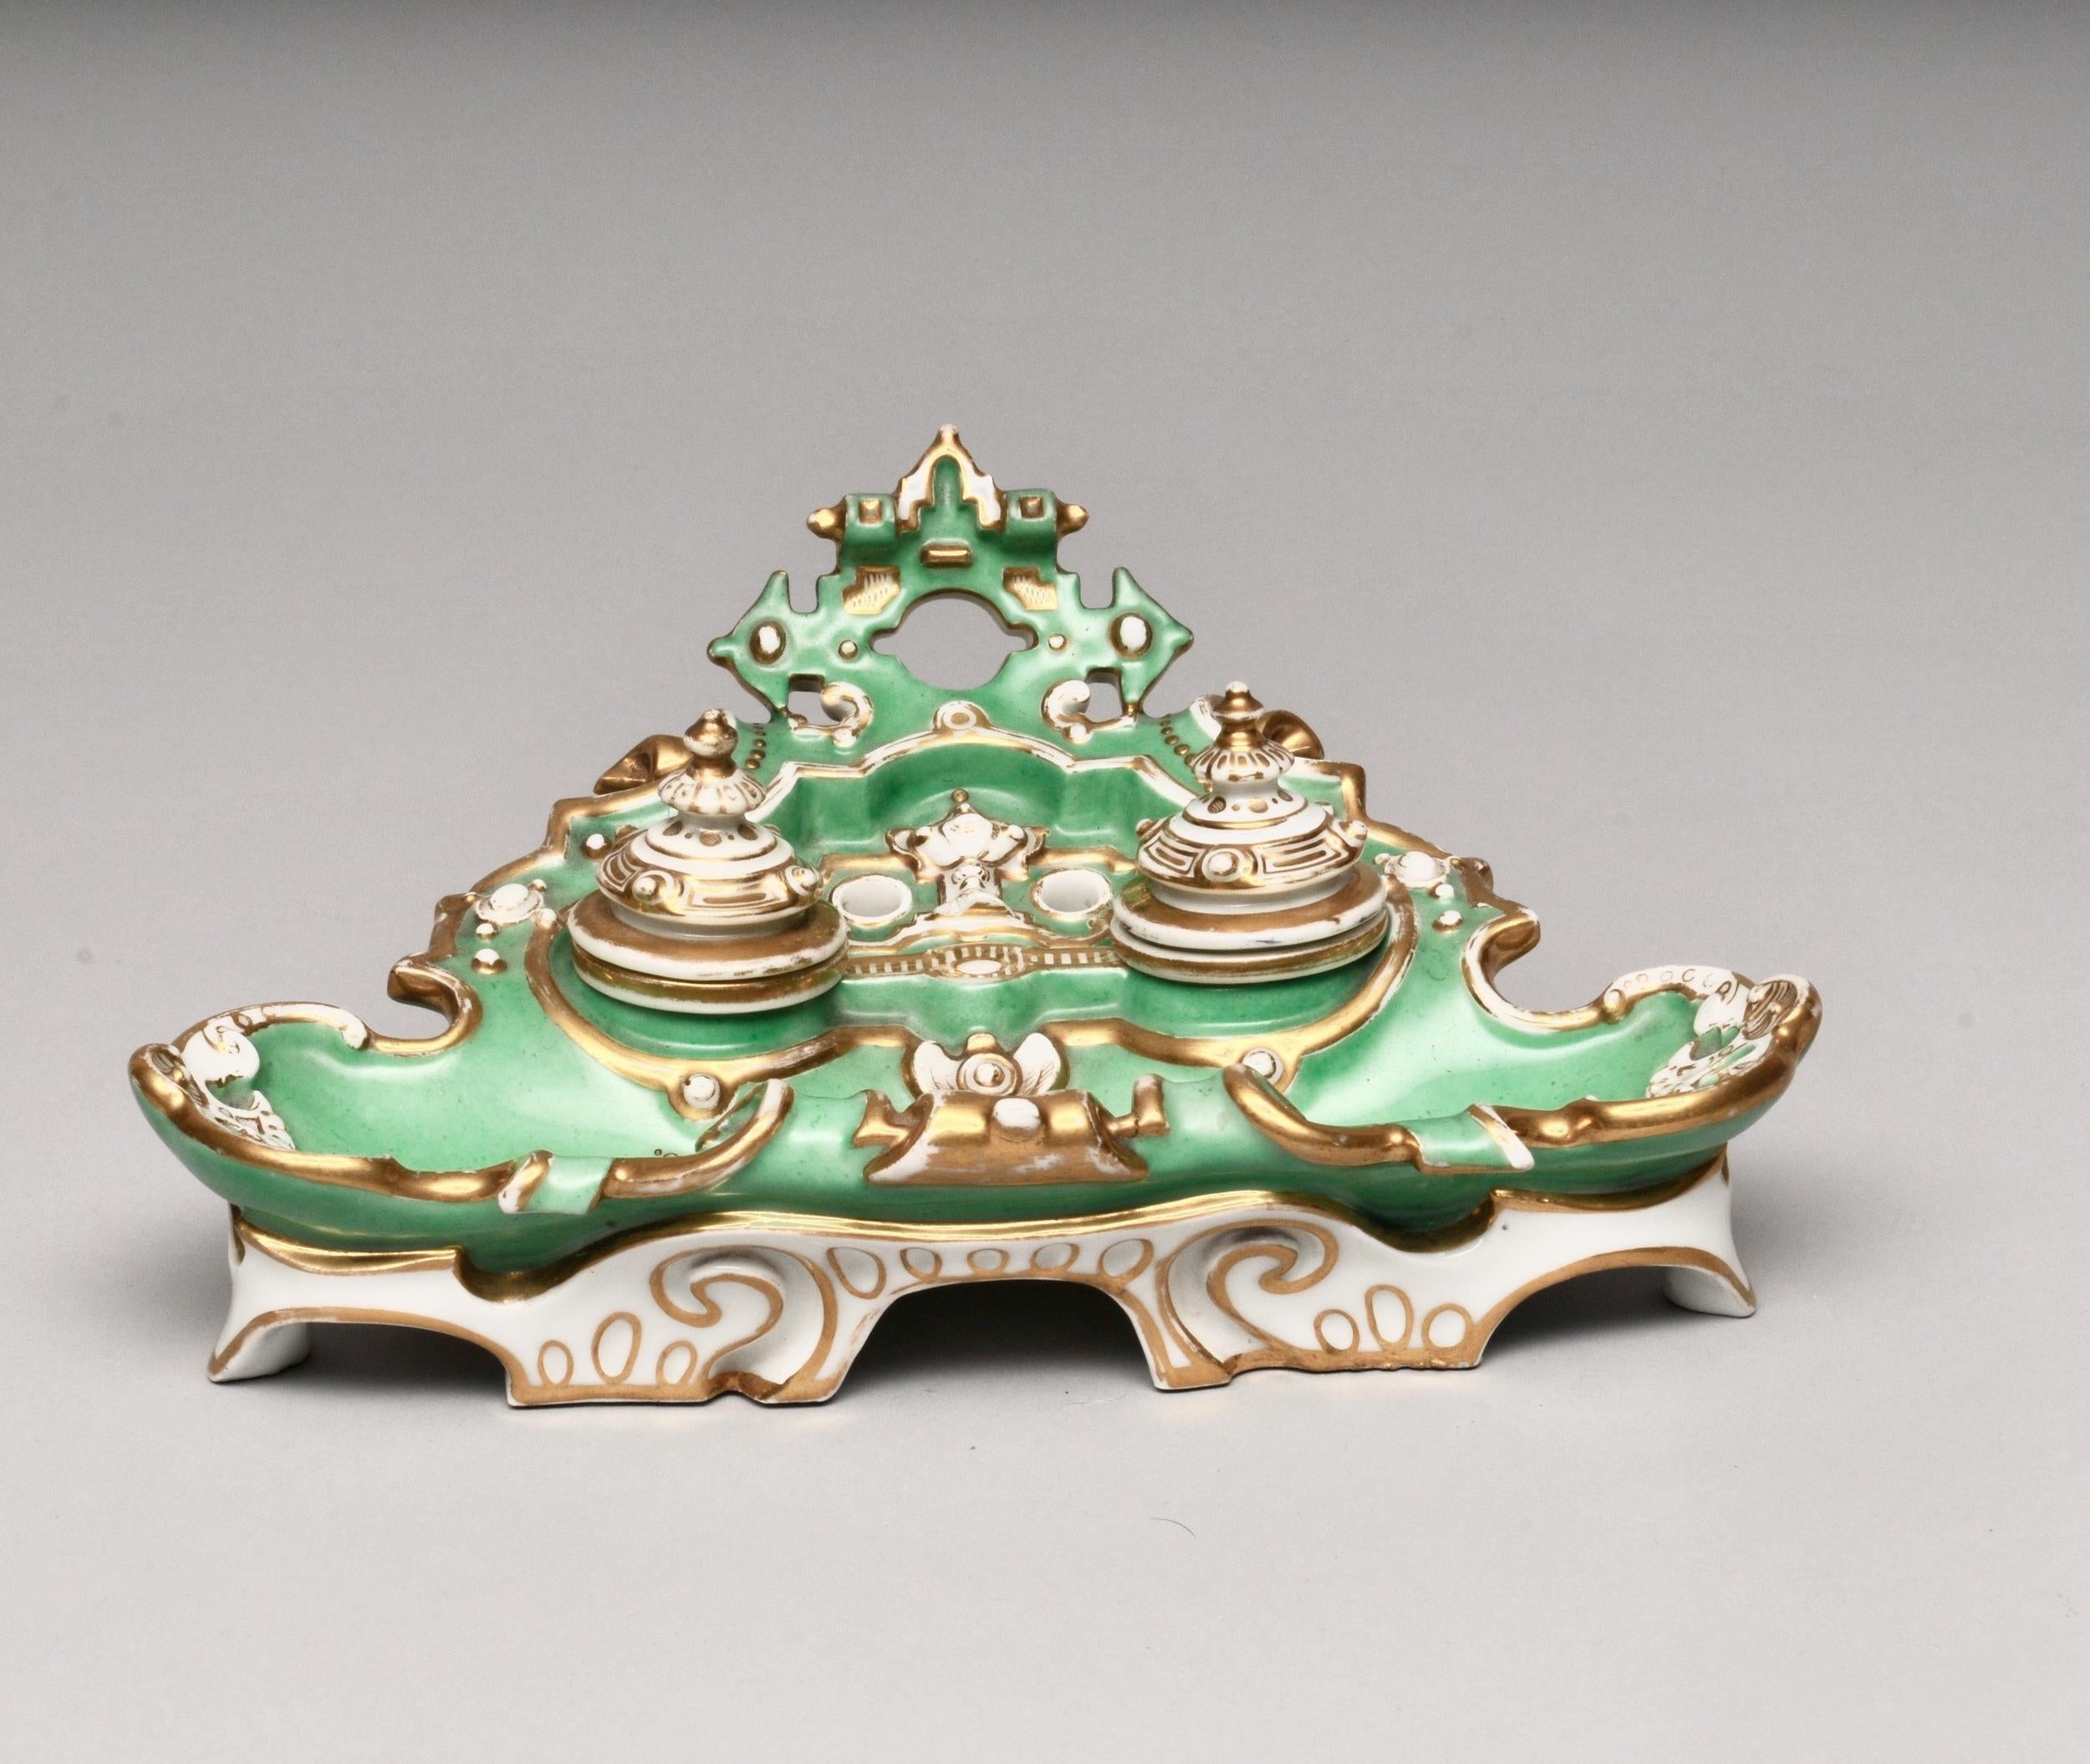 Minton Double Inkwell

Measures: H 10cm, W 25cm, D 18cm

A beautiful inkwell, in excellent condition and stunning color.